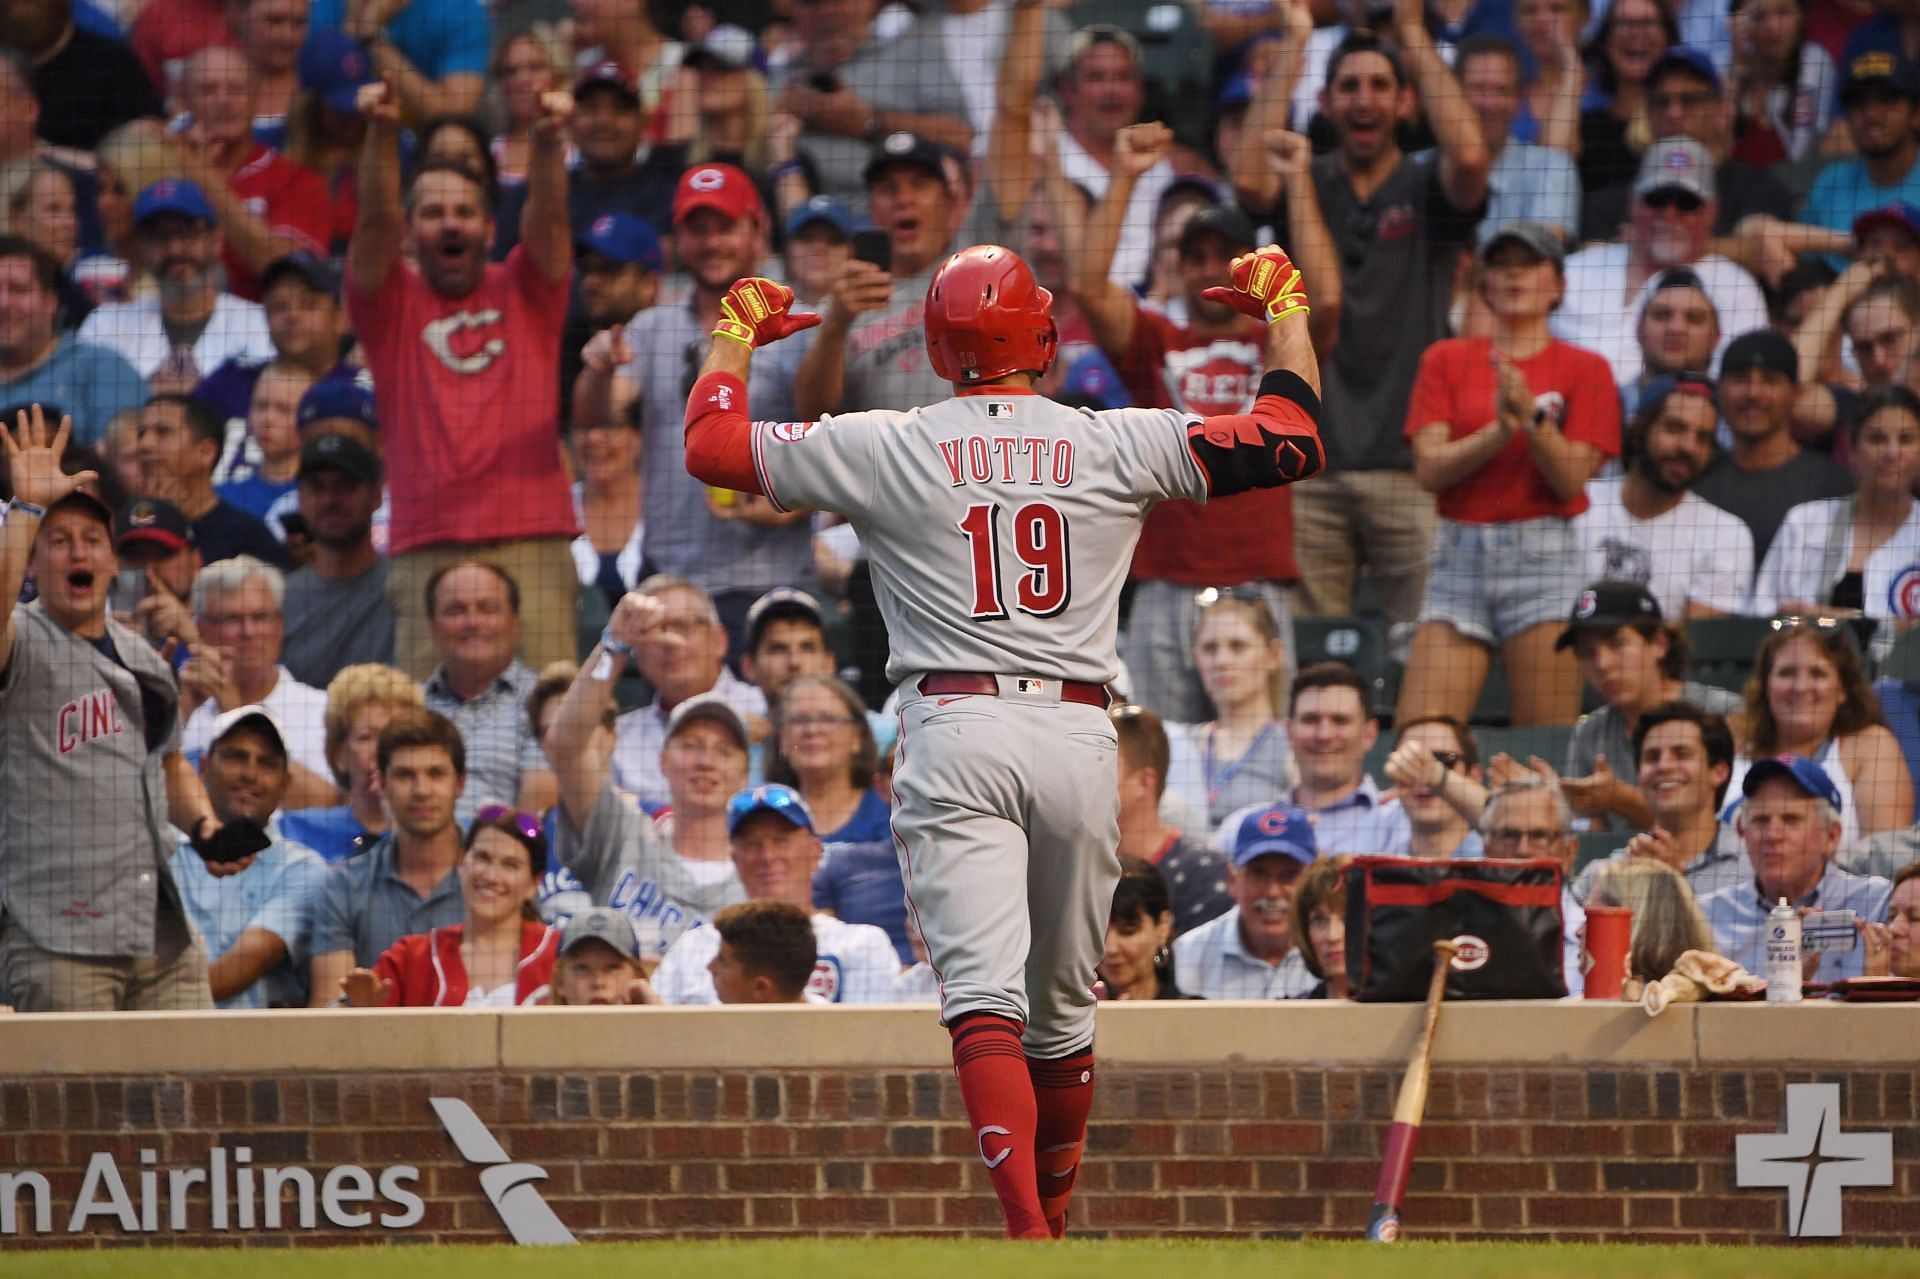 Reds: Joey Votto's season-ending surgery was 'successful